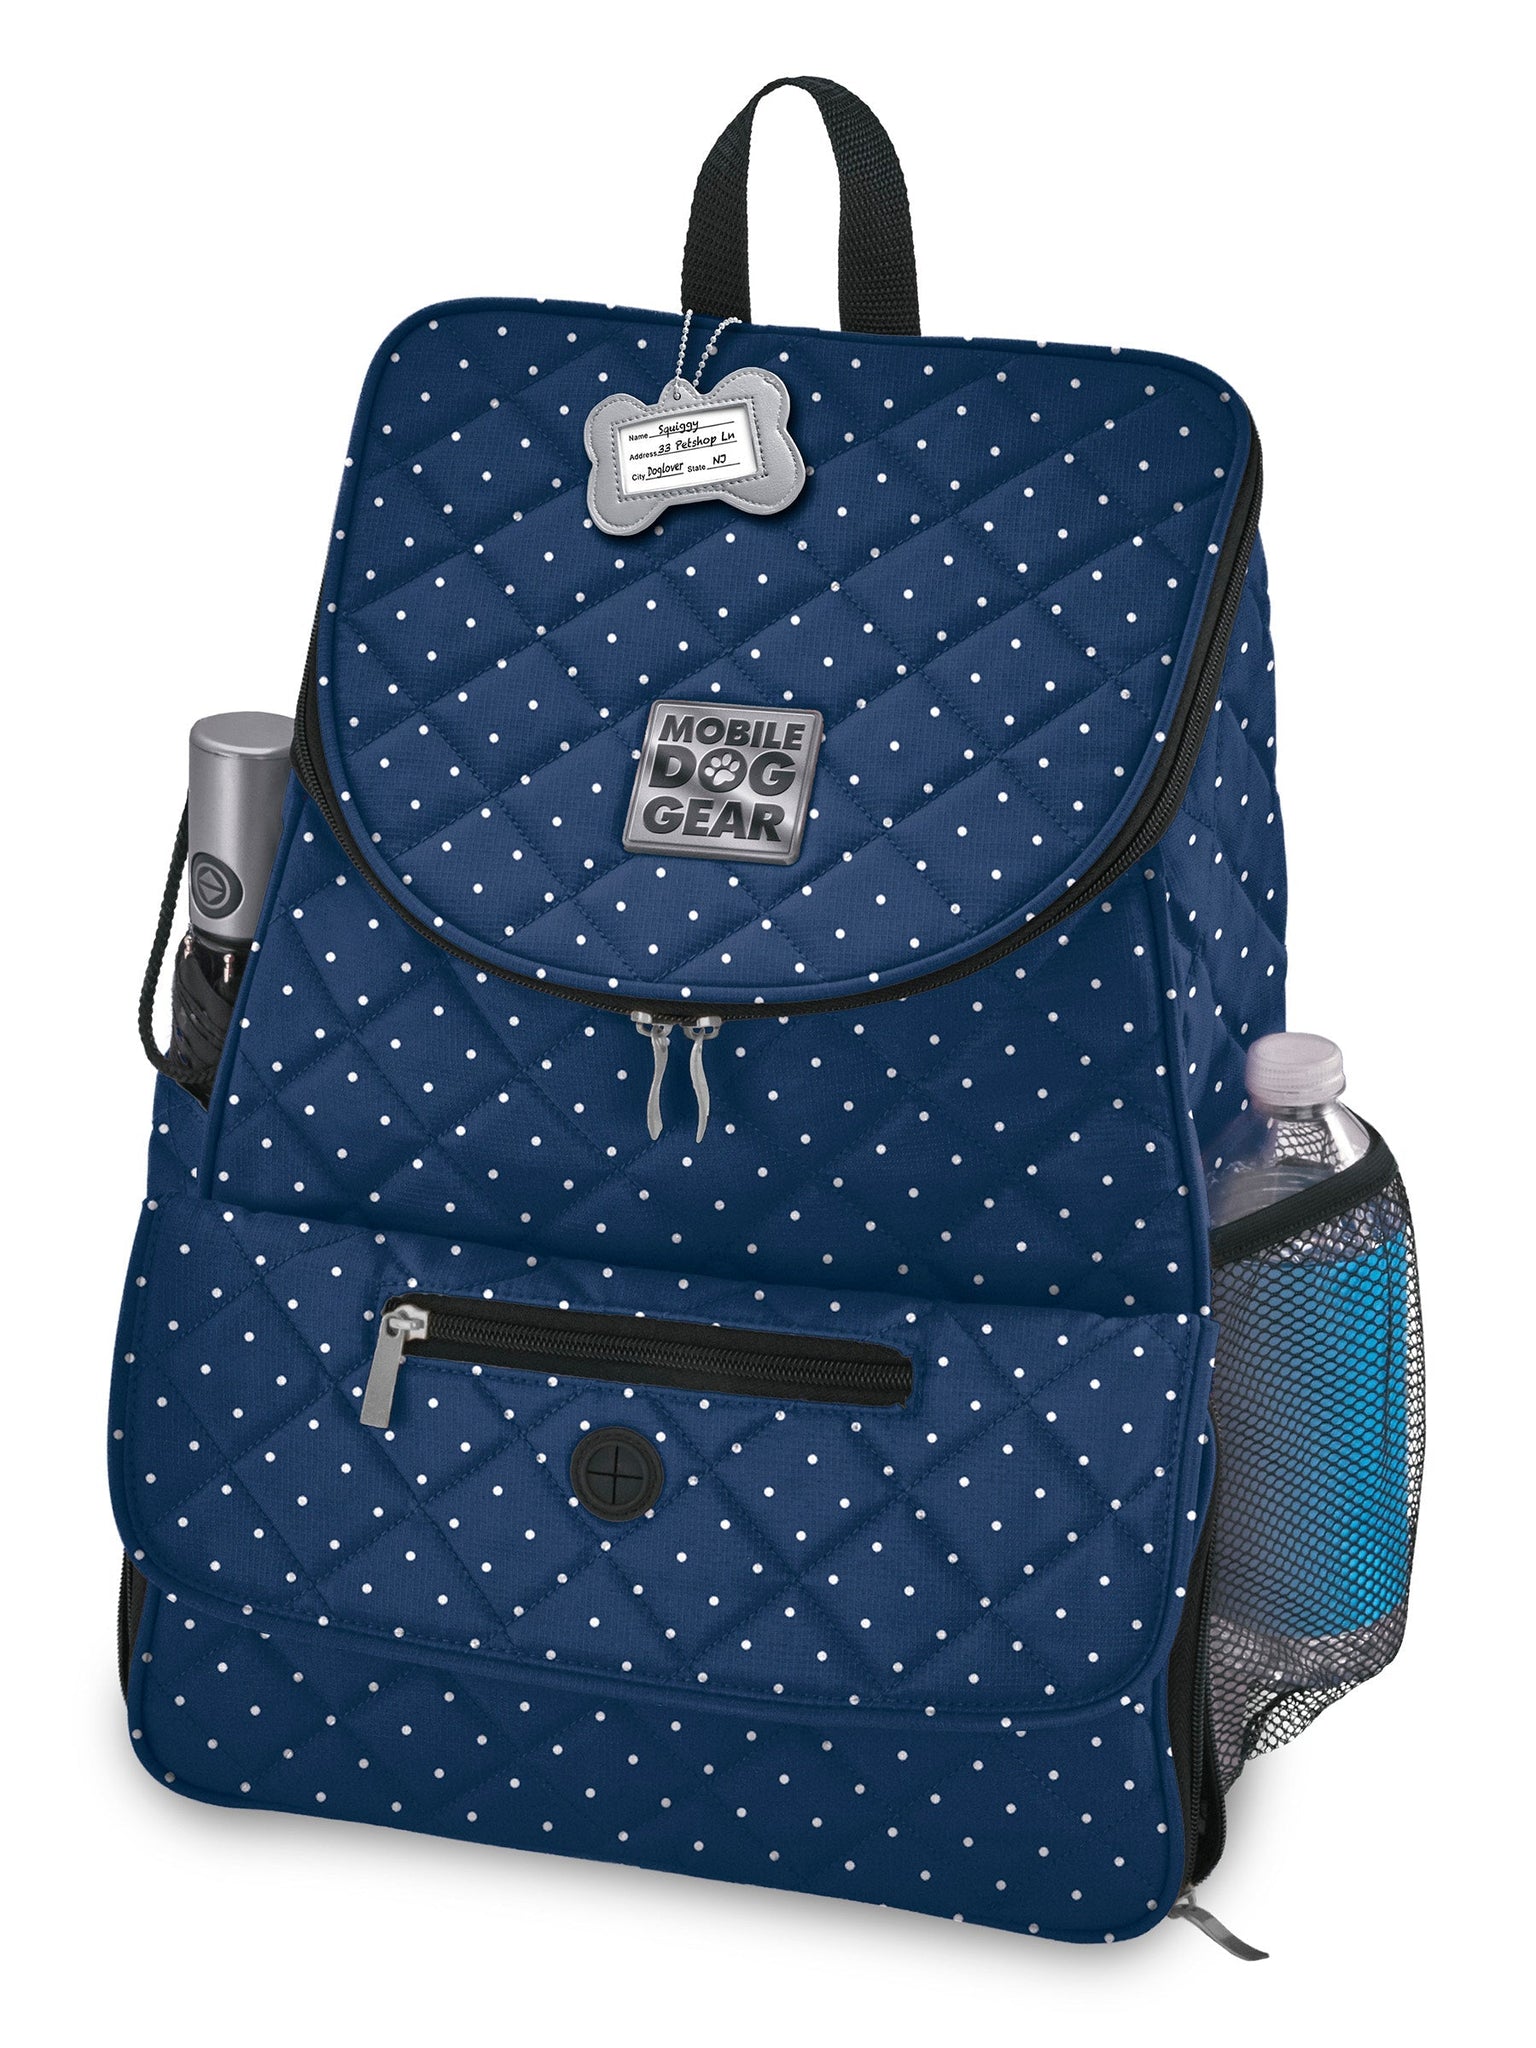 Overnight Dog Backpack In Navy / White Dots